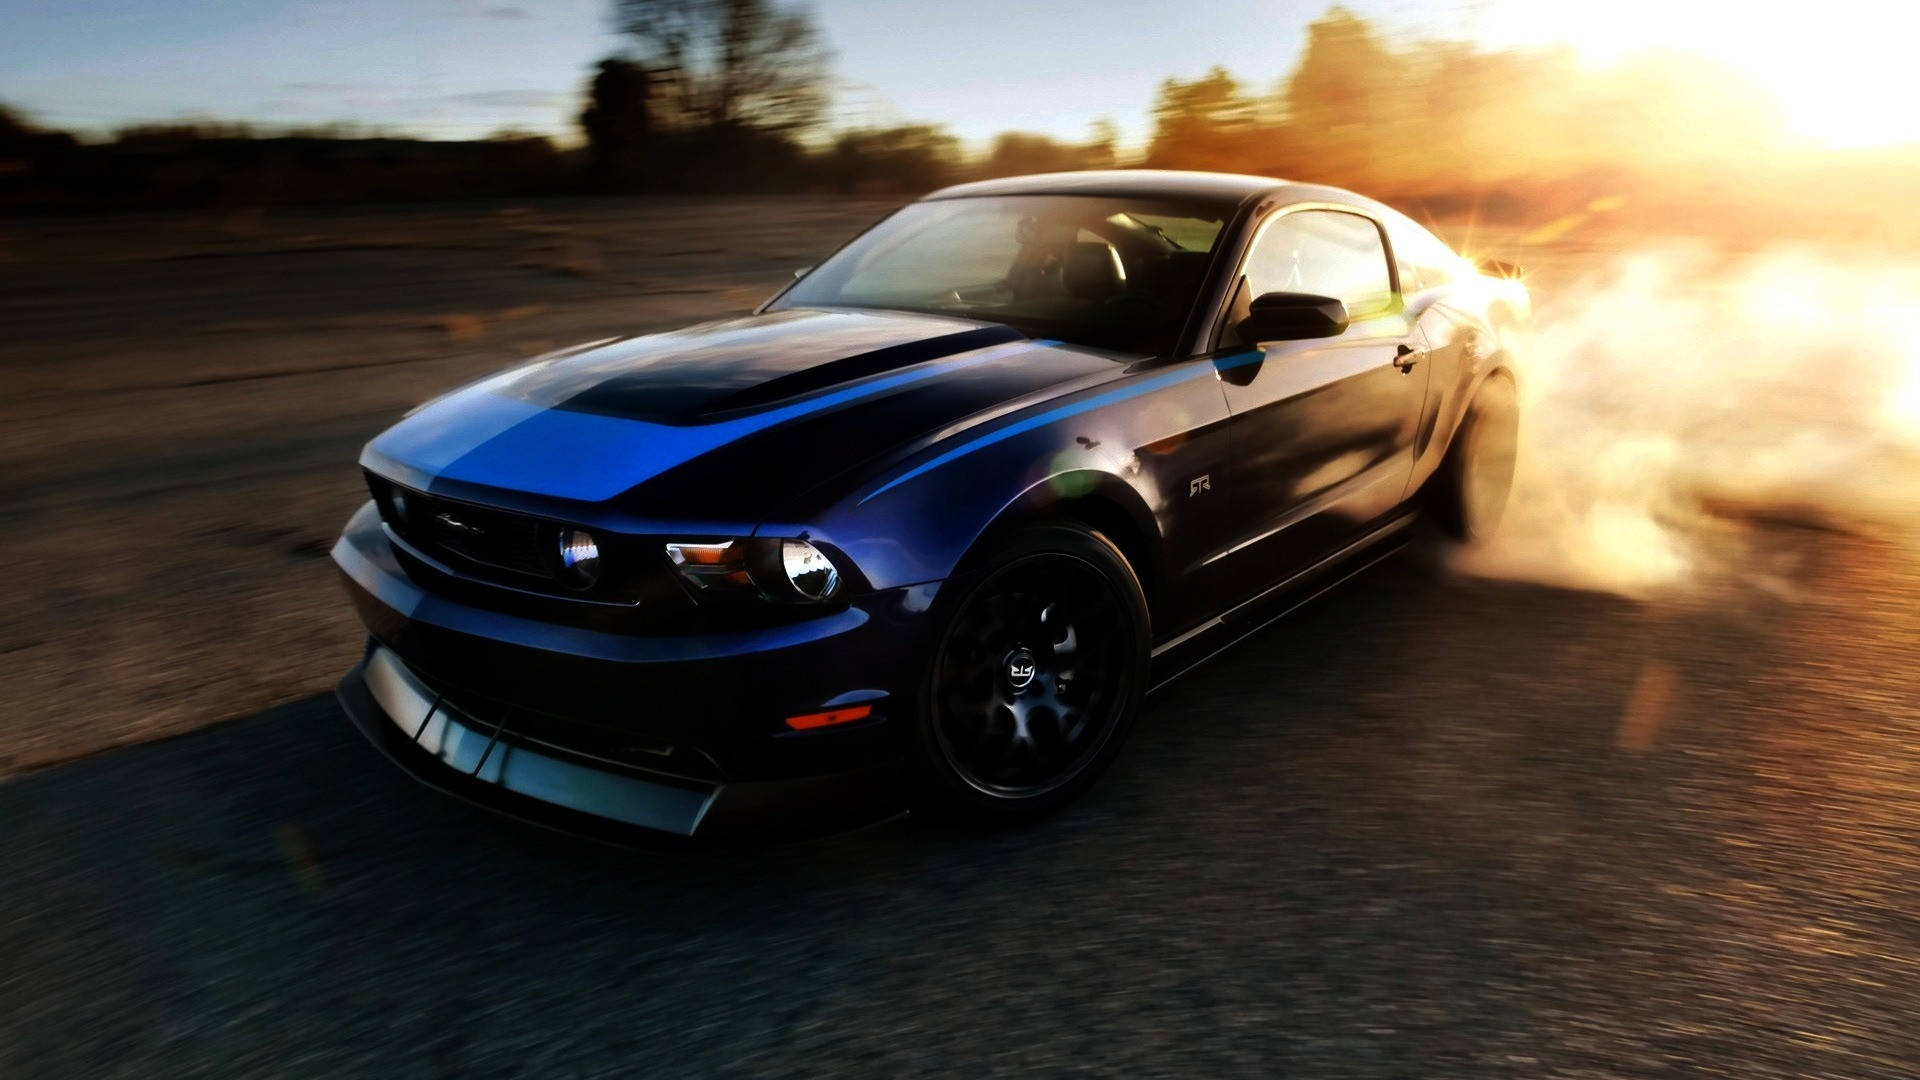 Black And Blue 2014 Ford Mustang Hd Wallpaper